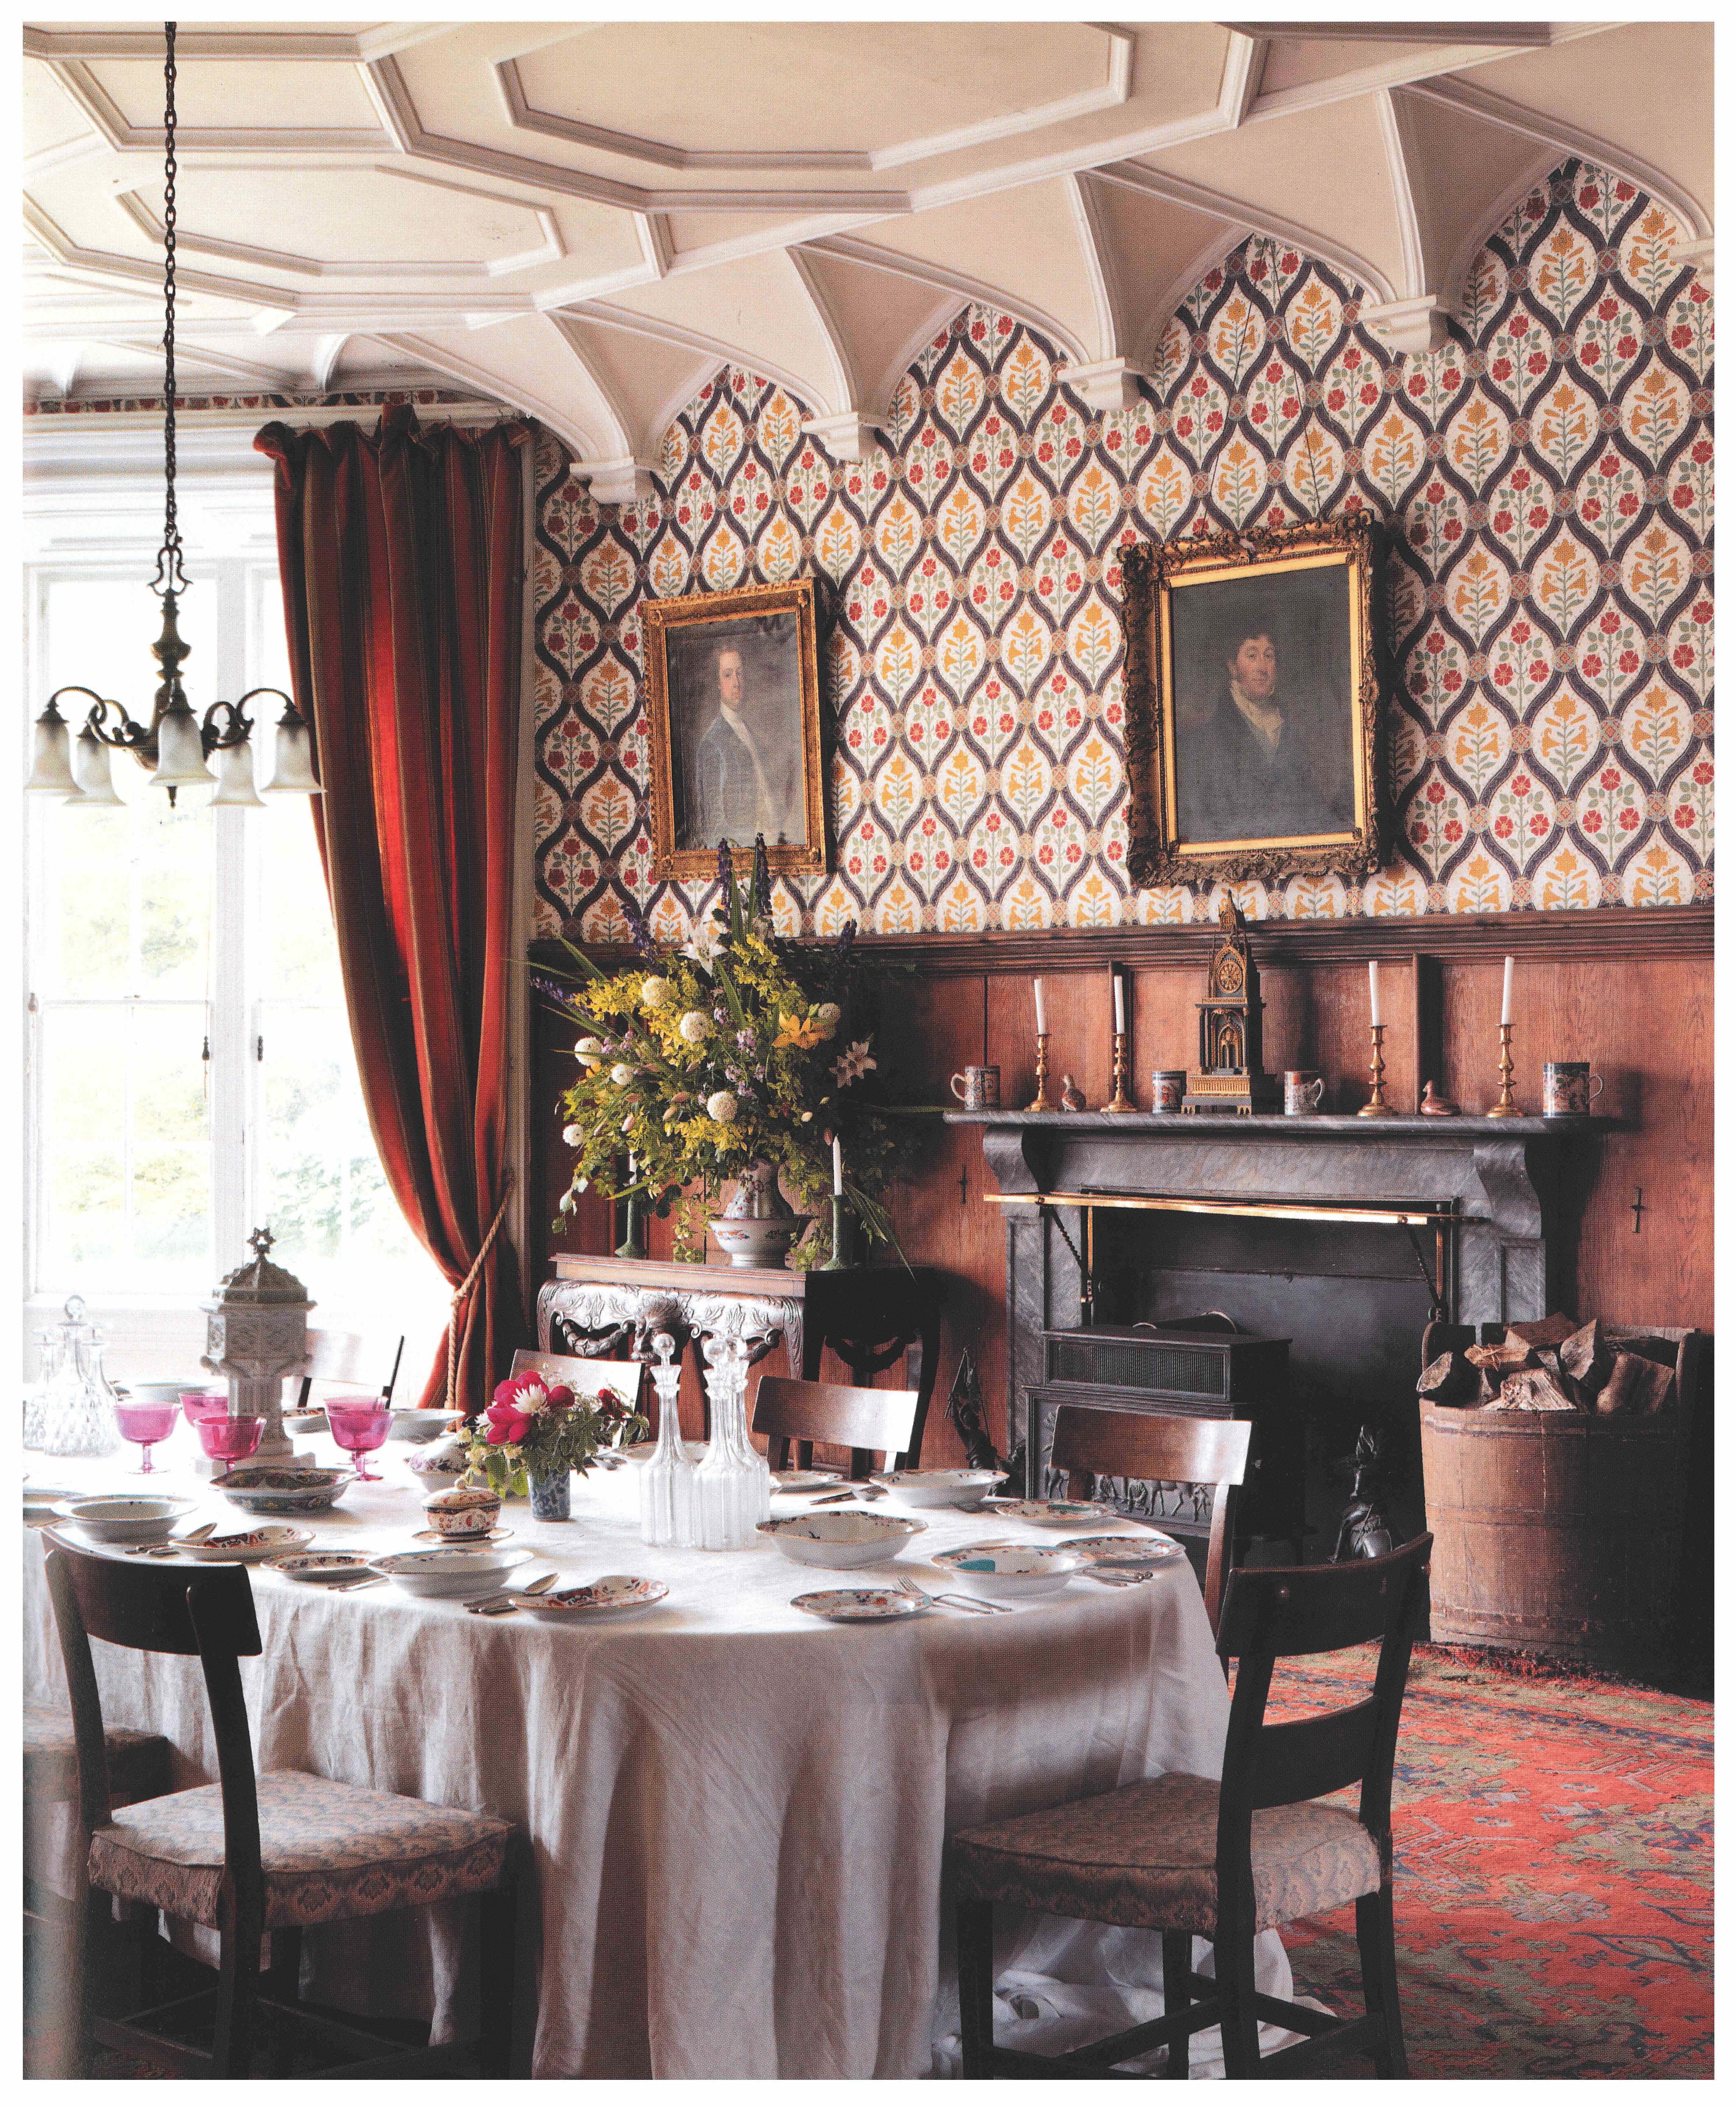 Dining Room at Tullynally, County Westmeath. ©CICO Books 2009 Simon Brown